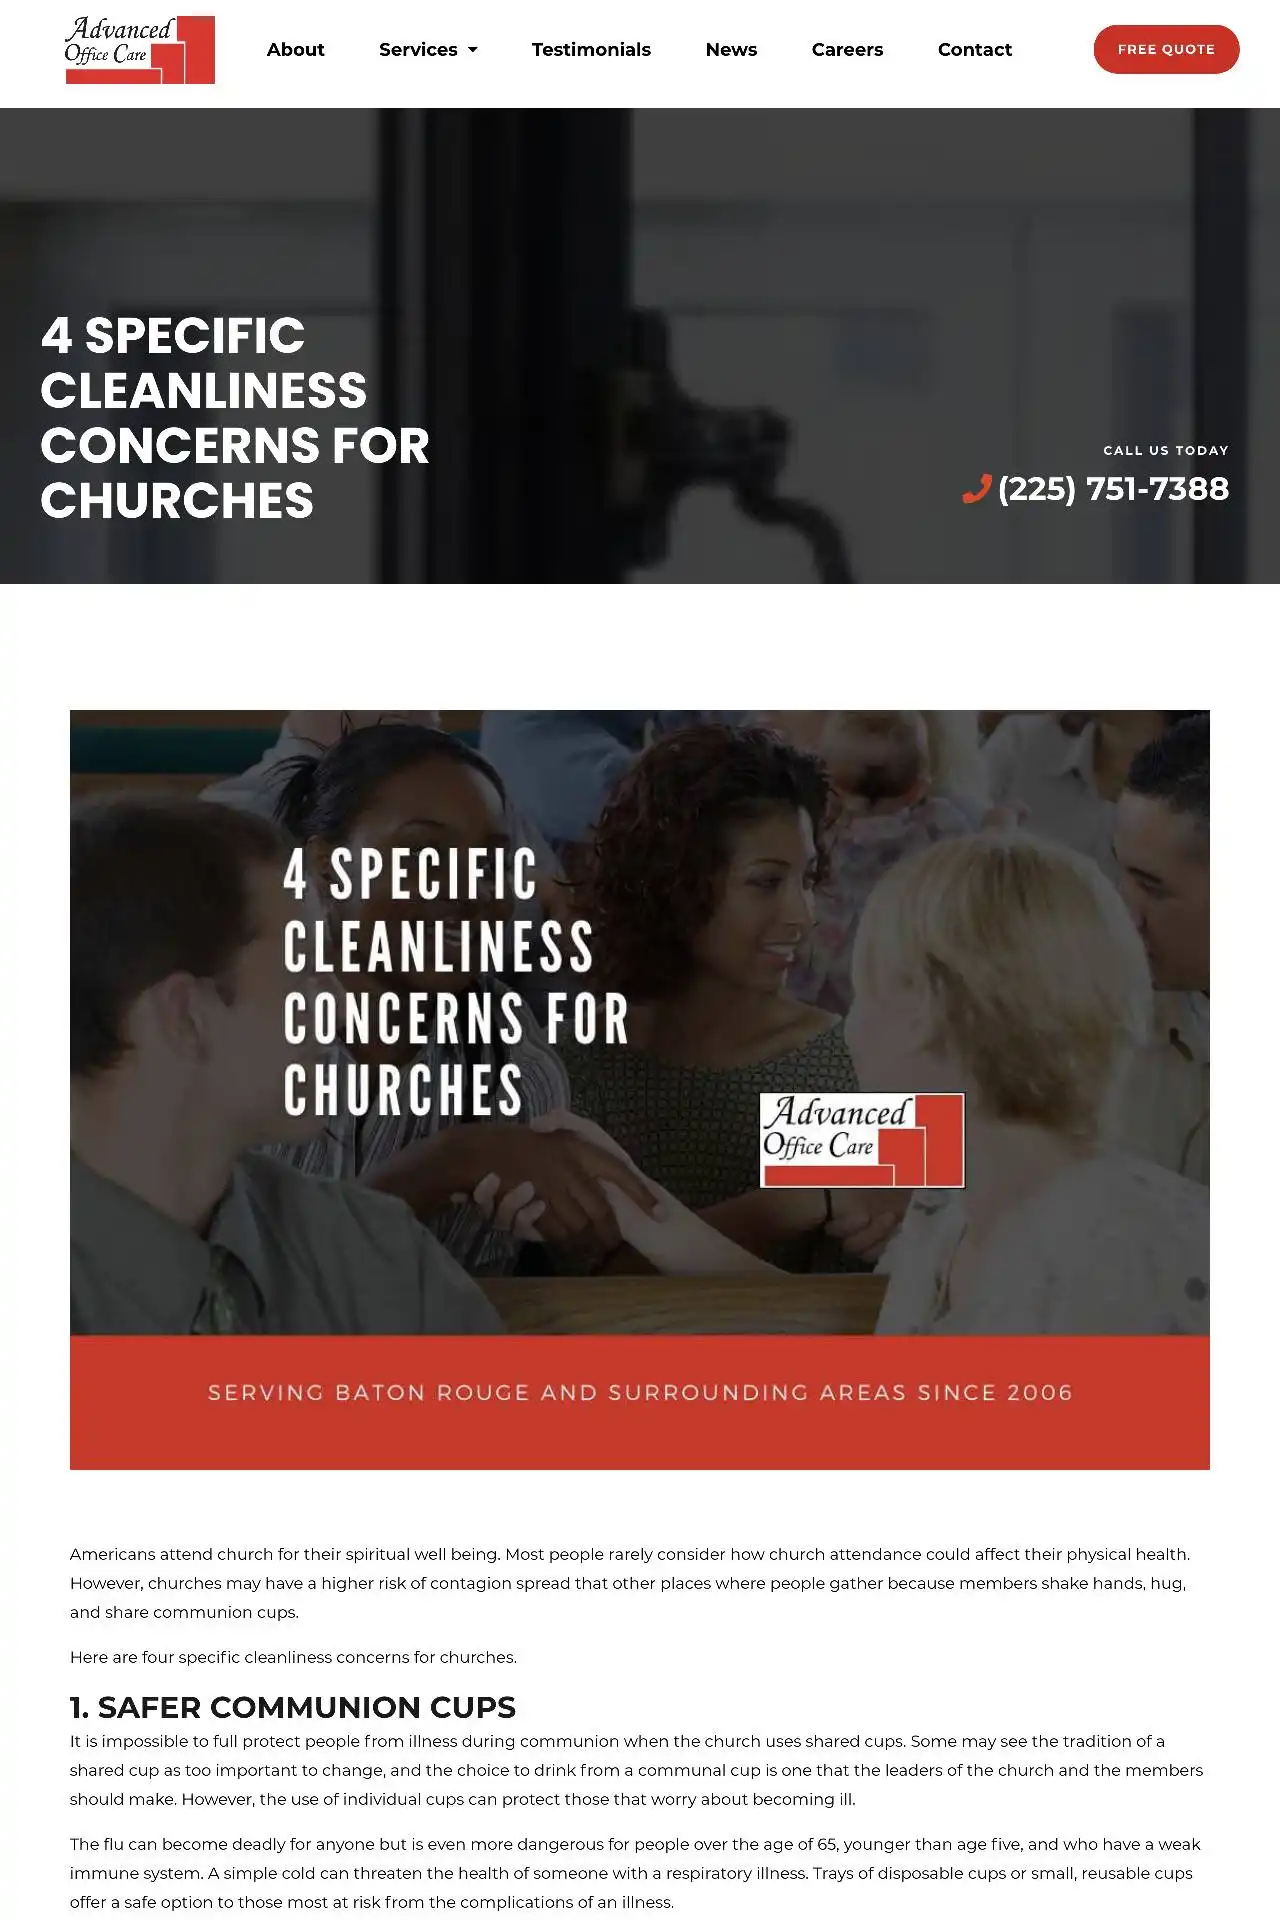 baton rouge cleaning company website design development https aocla.com cleaning 4 specific cleanliness concerns for churches